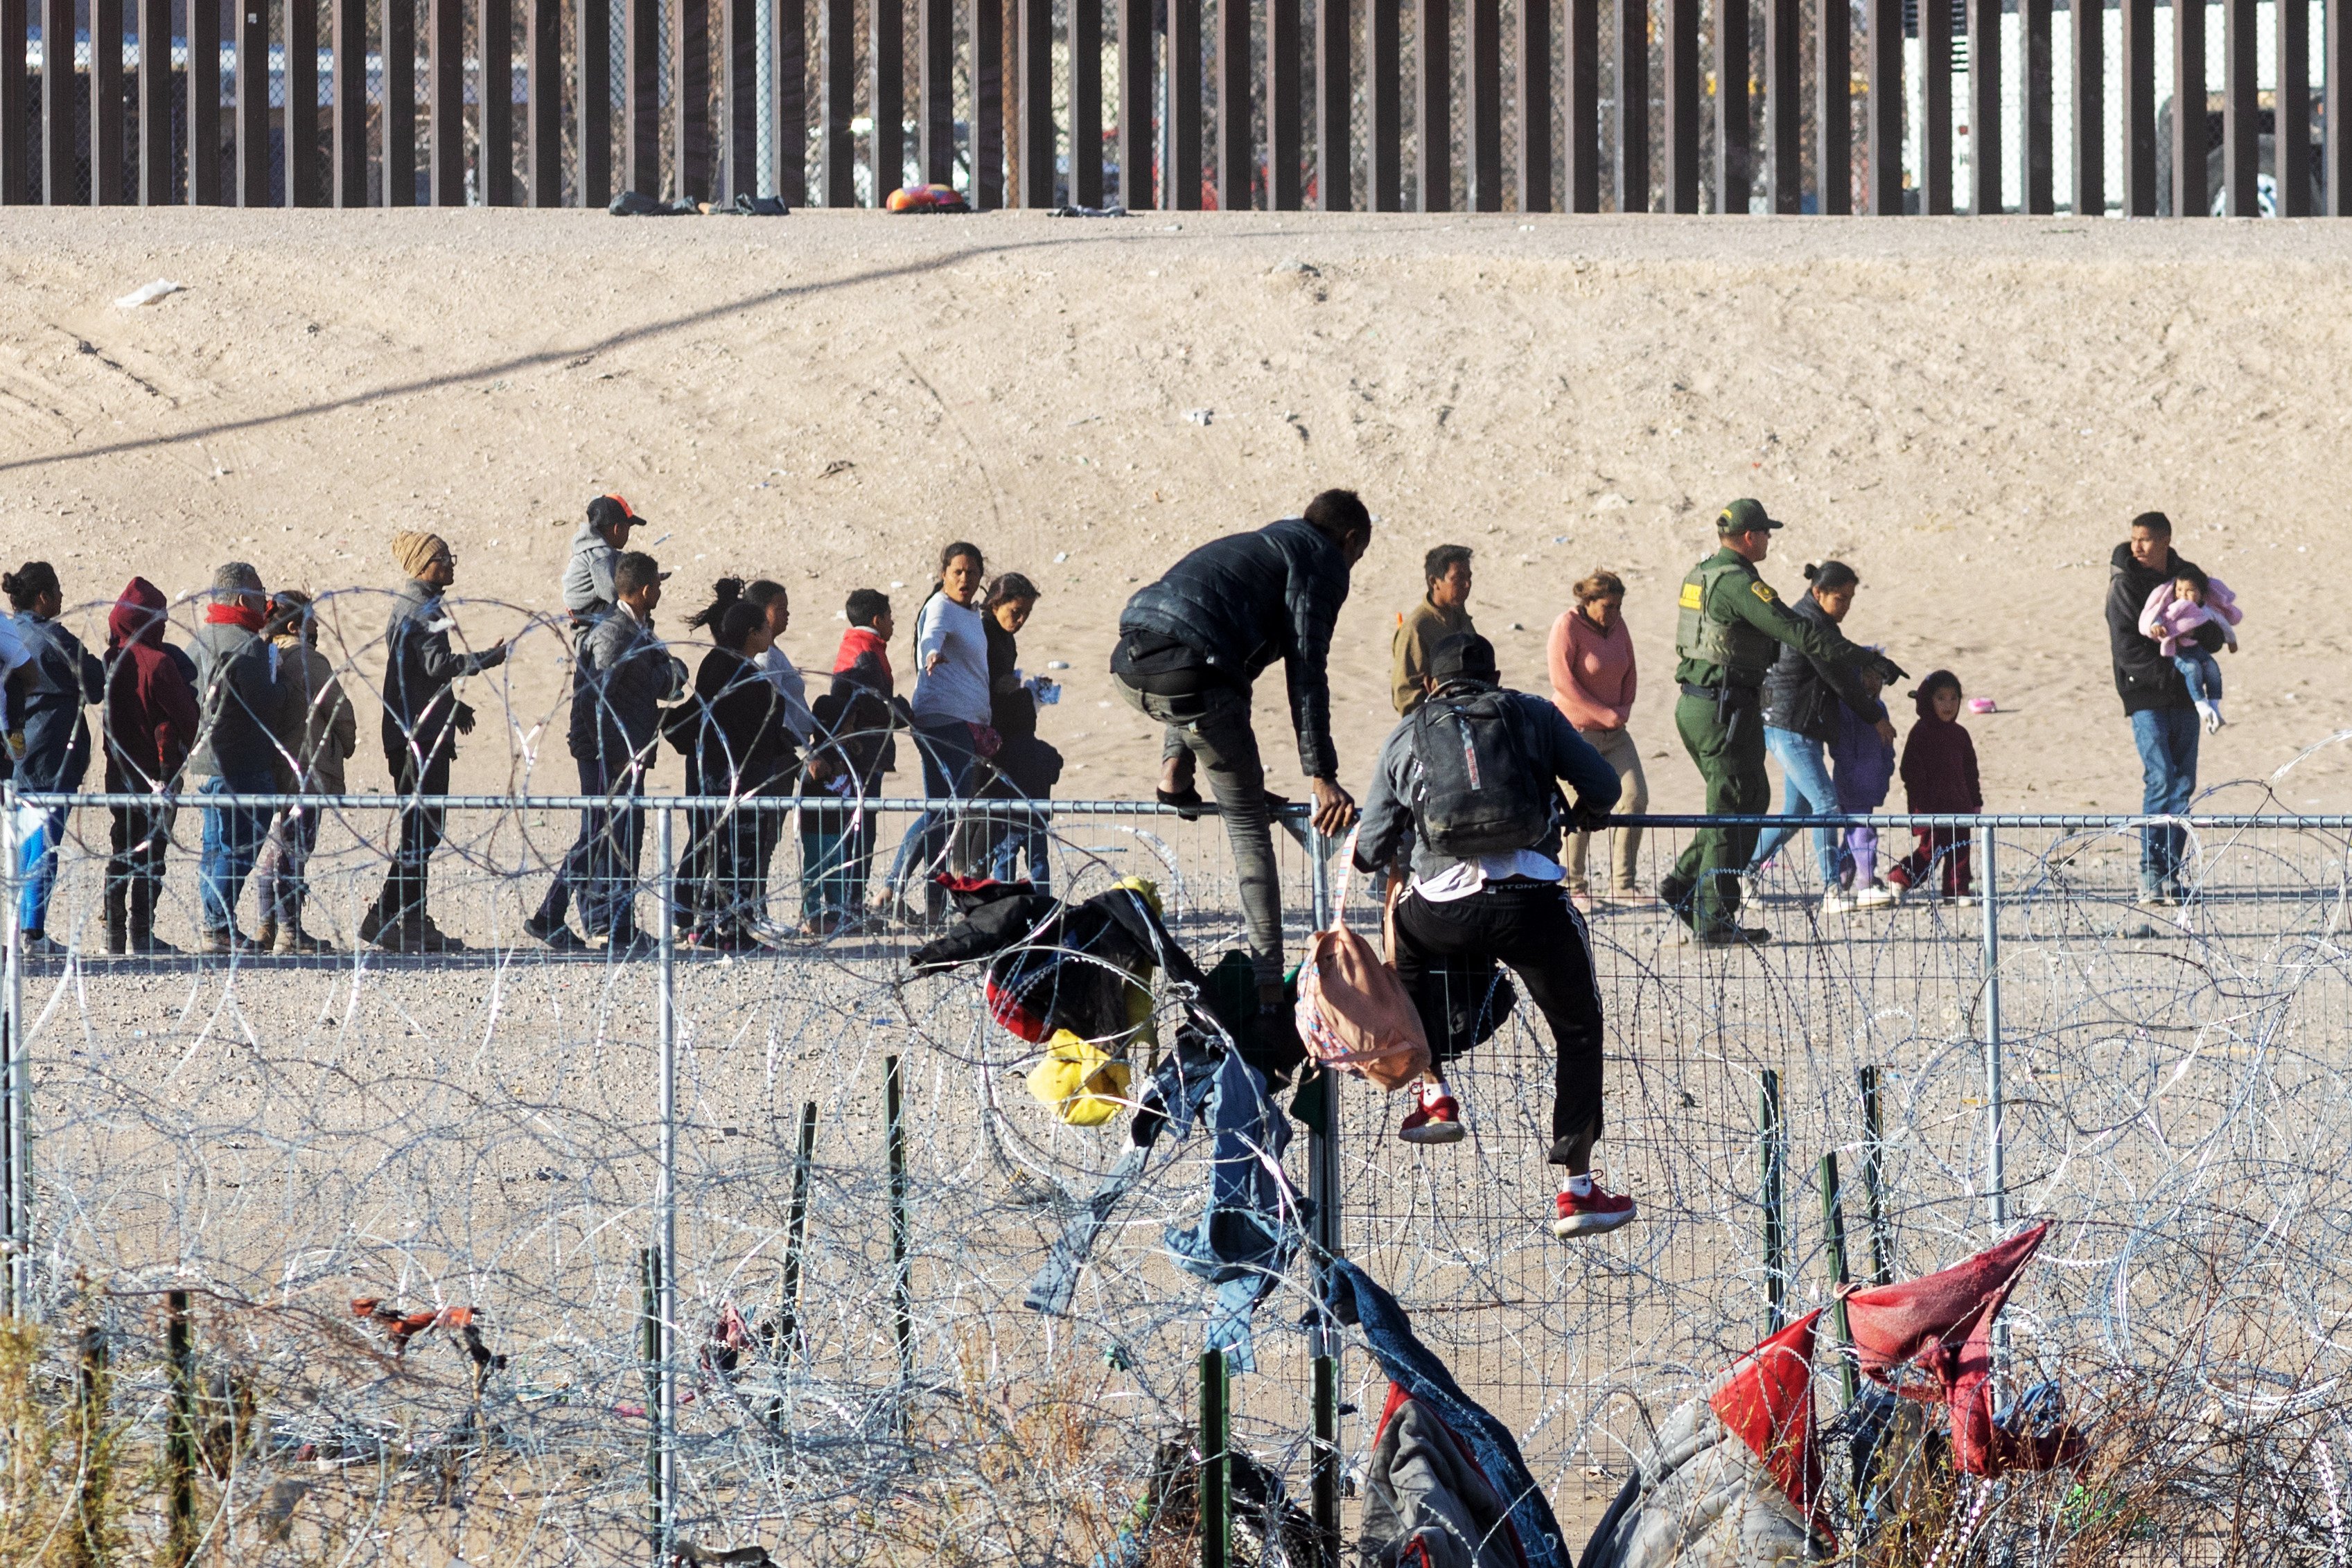 Two men scale fence, as hundreds of migrants queue along the border wall dividing Mexico and the United States, awaiting processing by the US Border Patrol. Photo: dpa